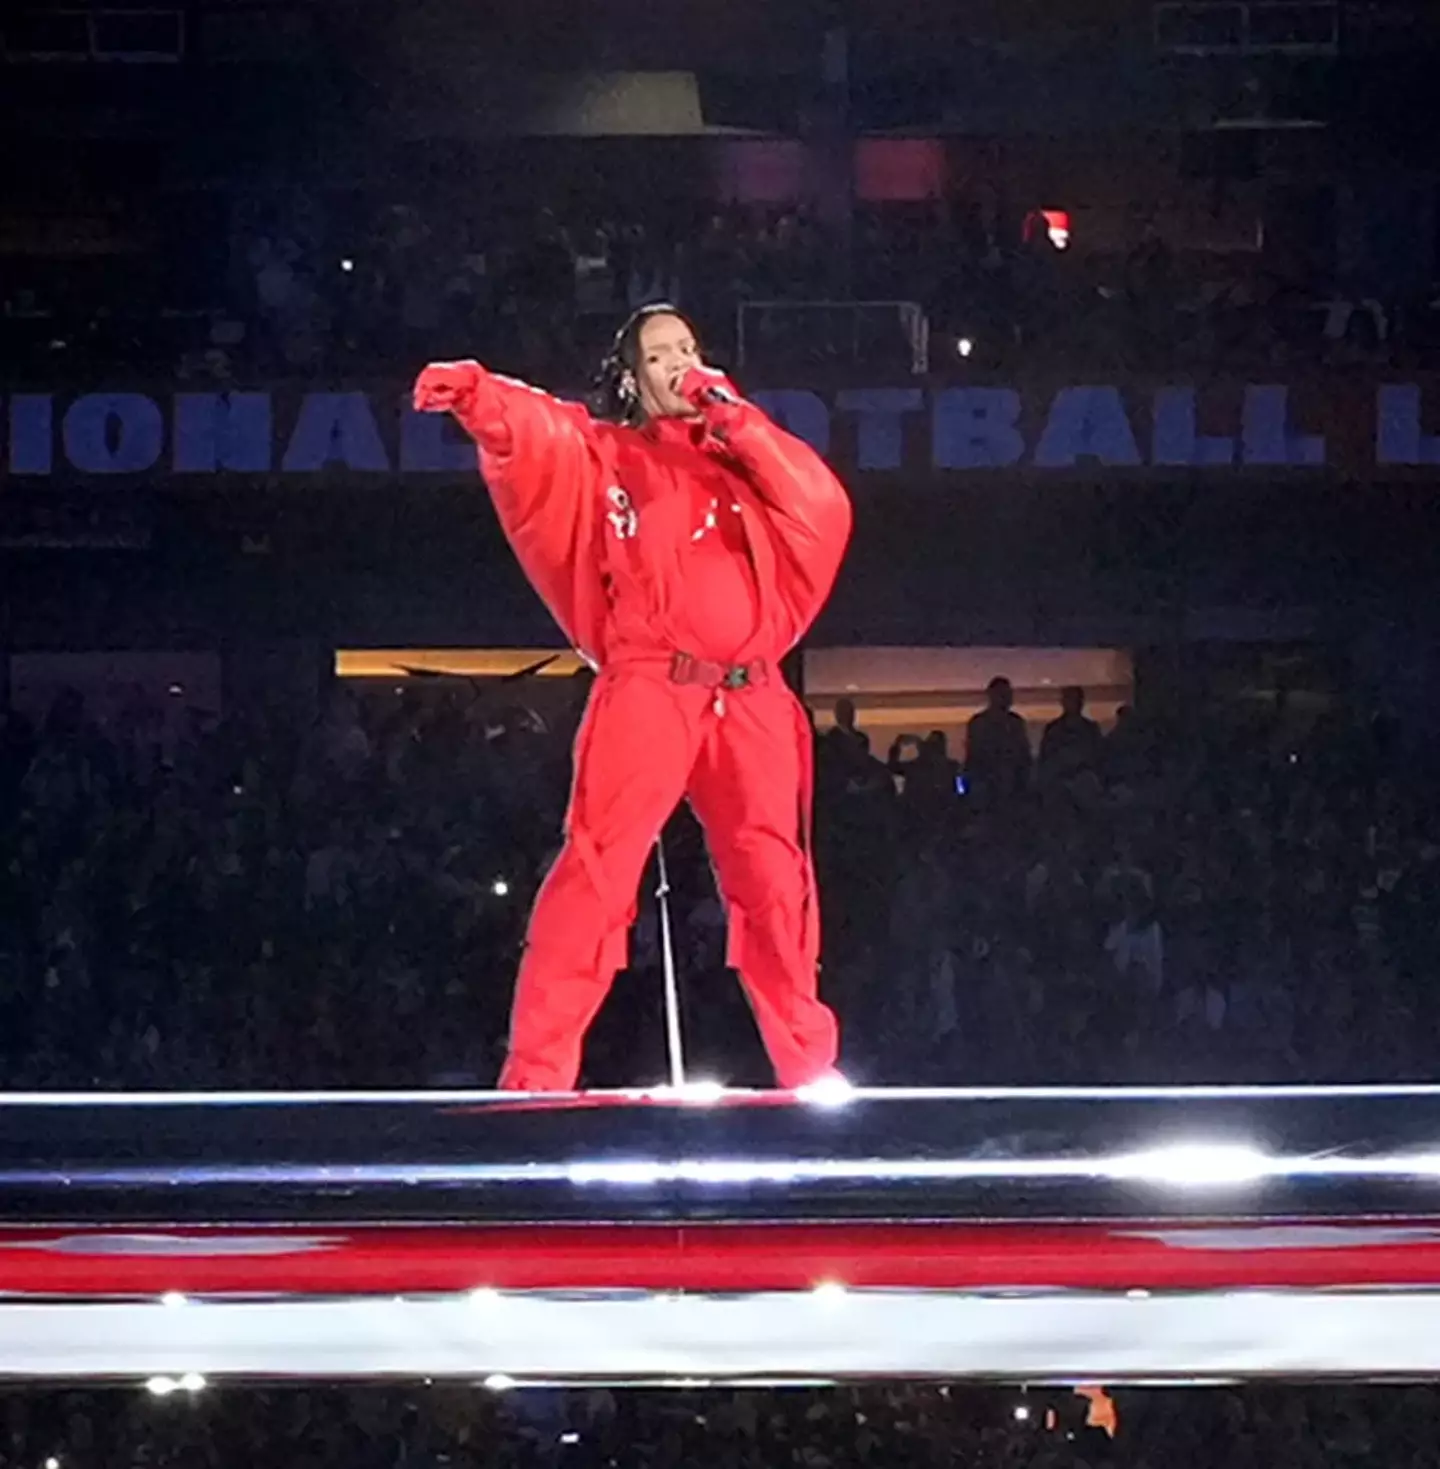 Rihanna looked iconic in her halftime show outfit at the Super Bowl.